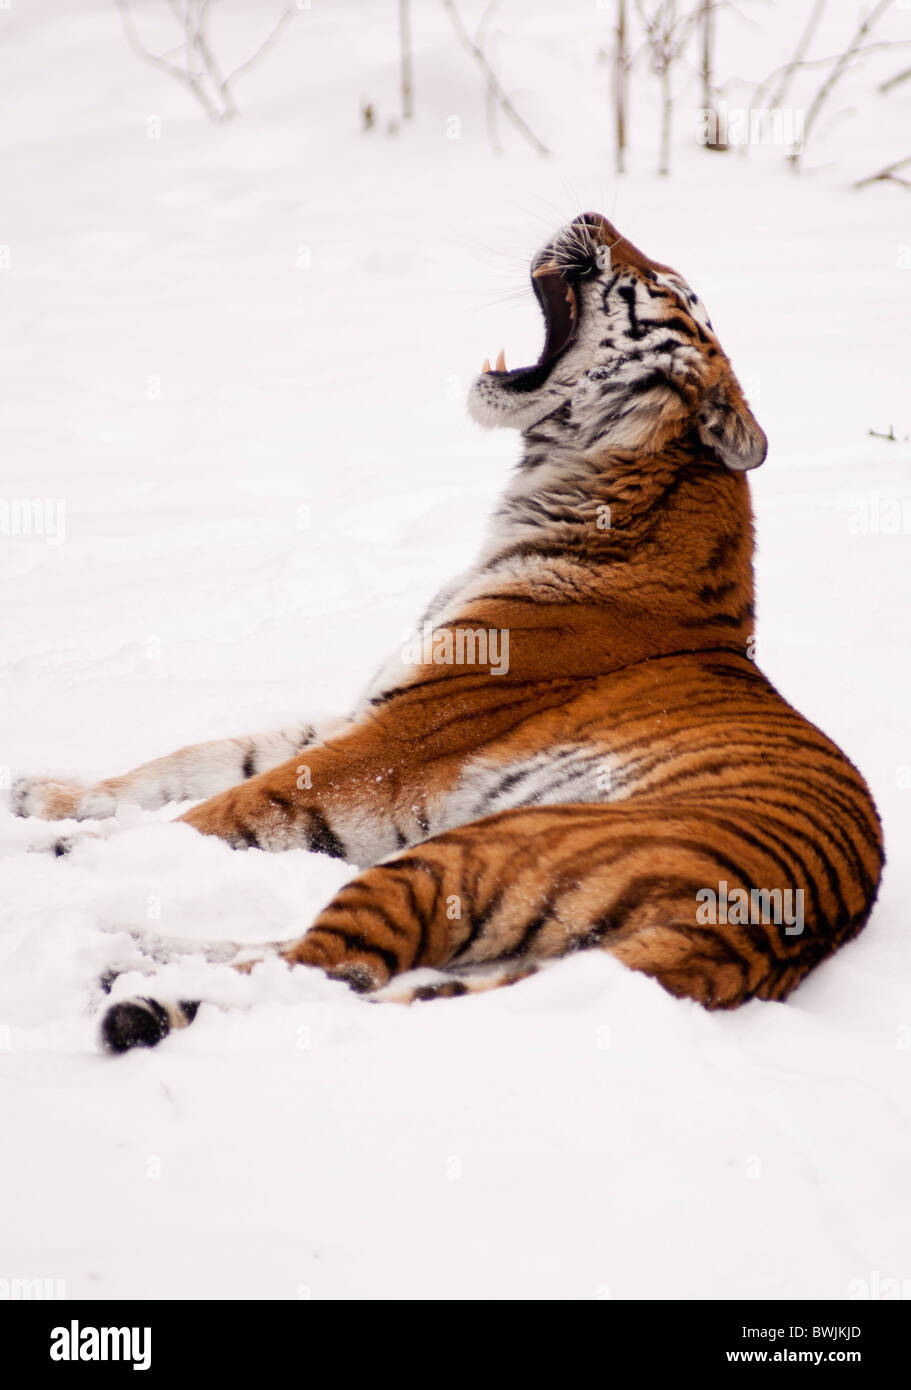 A Siberian tiger growls in the winter snow Stock Photo